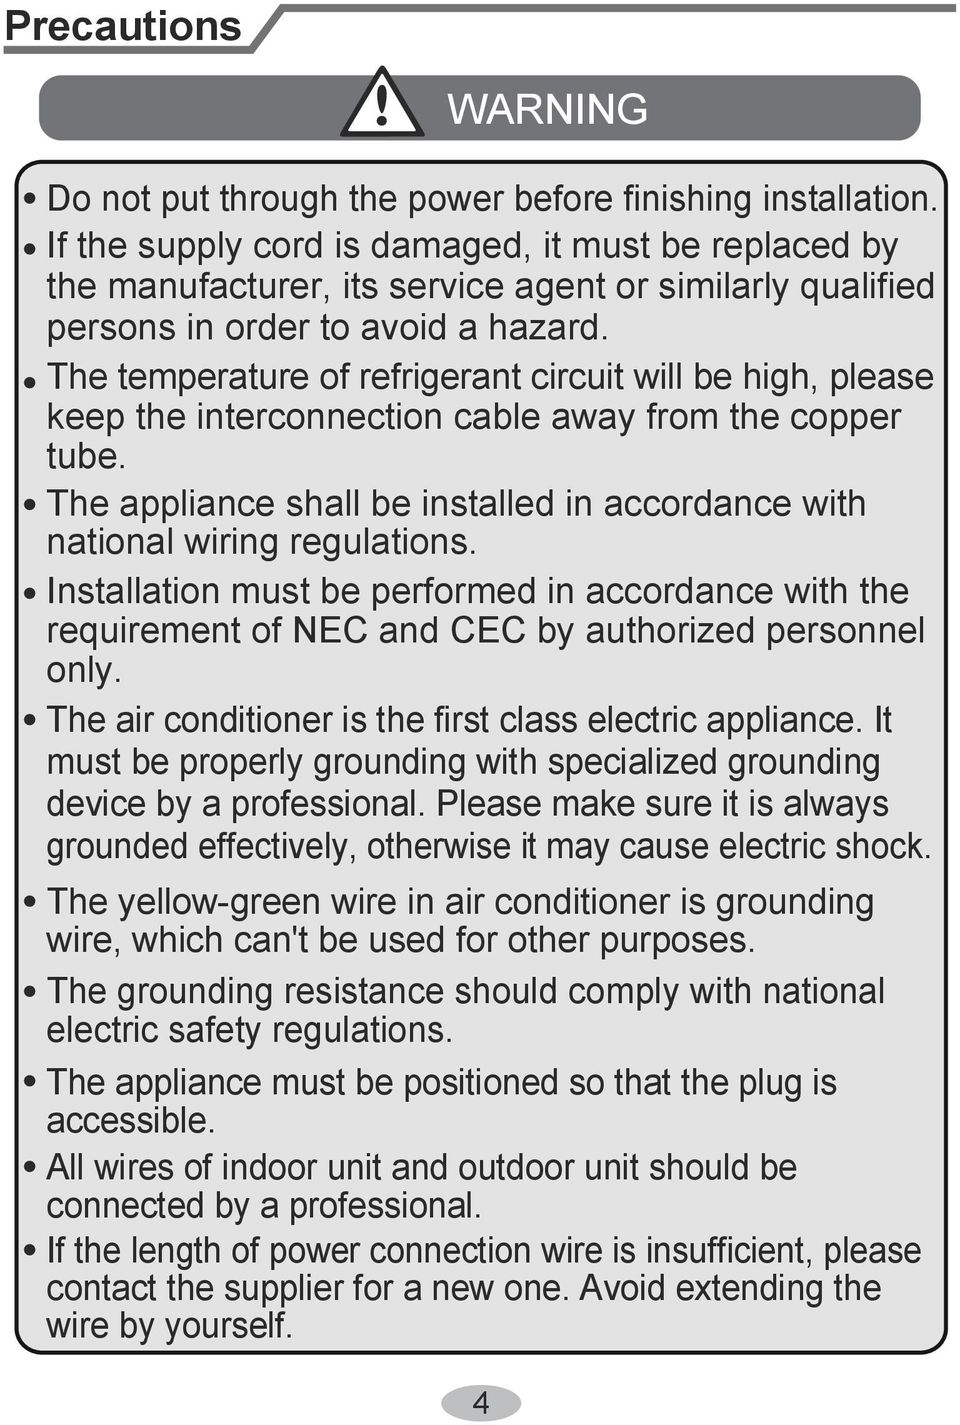 The temperature of refrigerant circuit will be high, please keep the interconnection cable away from the copper tube. The appliance shall be installed in accordance with national wiring regulations.